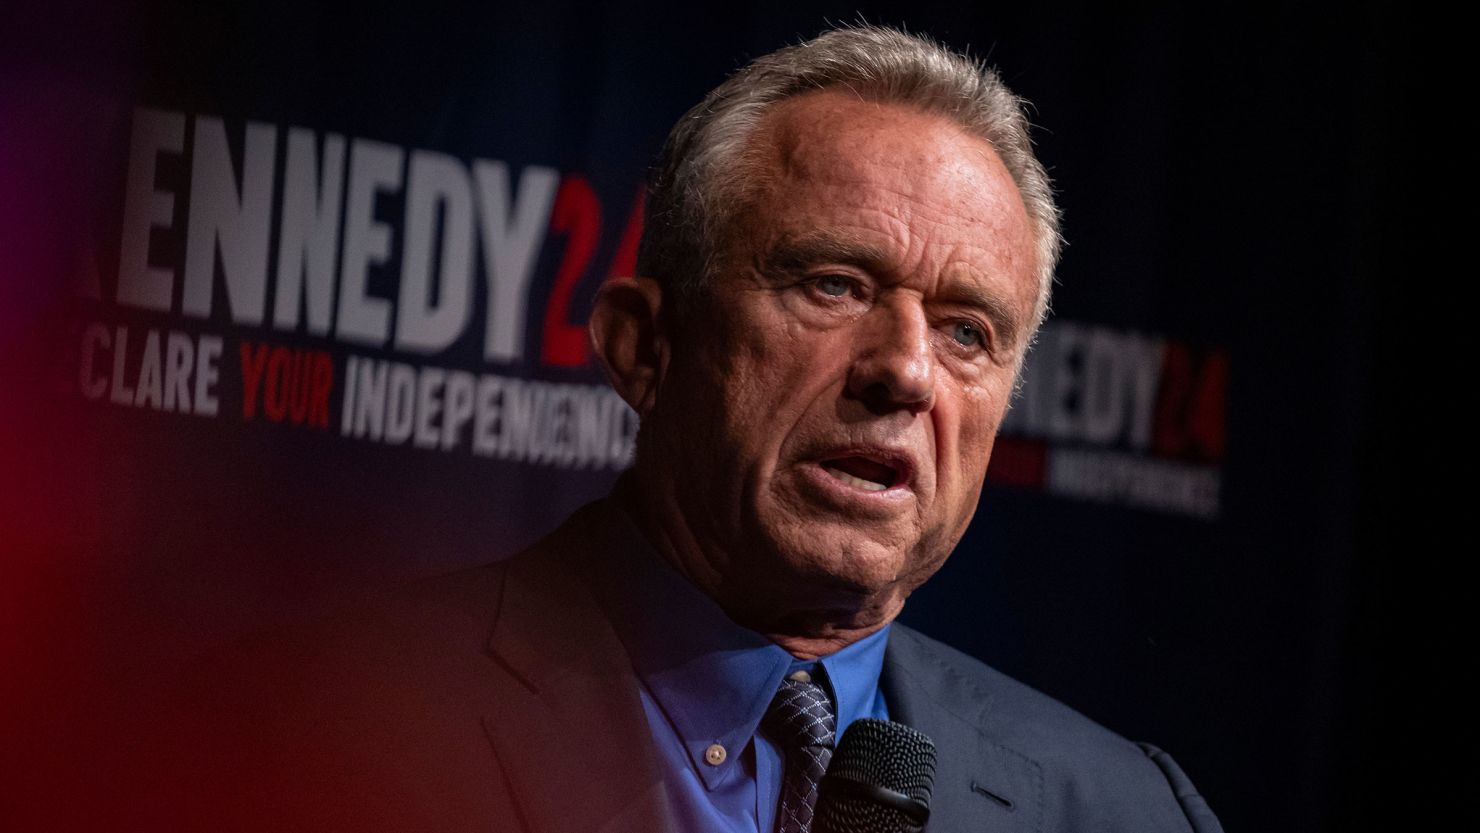 Speculation swirls around Robert F. Kennedy Jr.'s electoral ambitions (Credits: Getty Images)